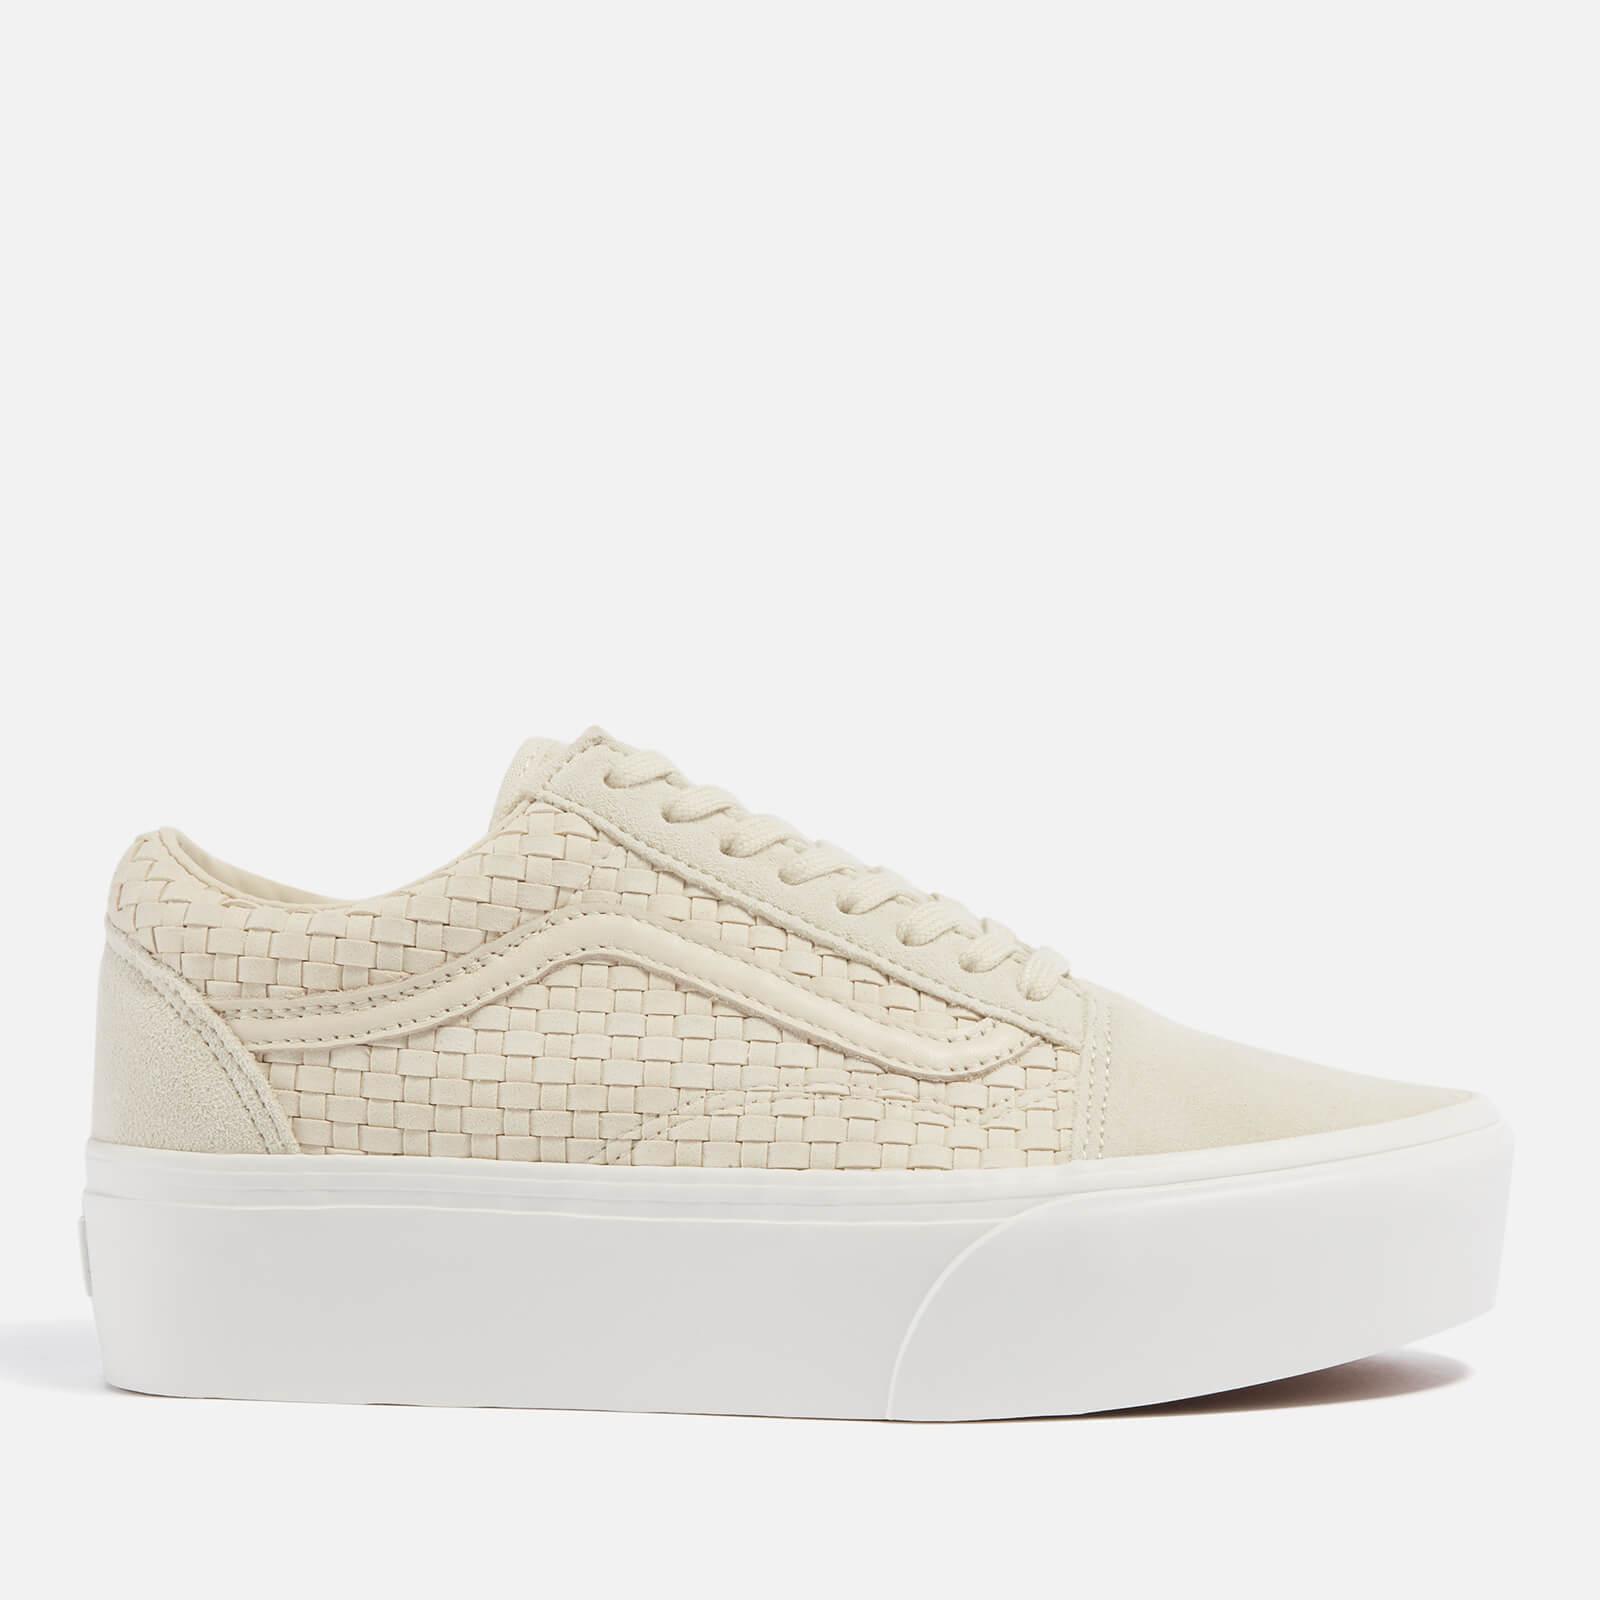 Vans Old Skool Stackform Suede And Canvas Trainers in White |